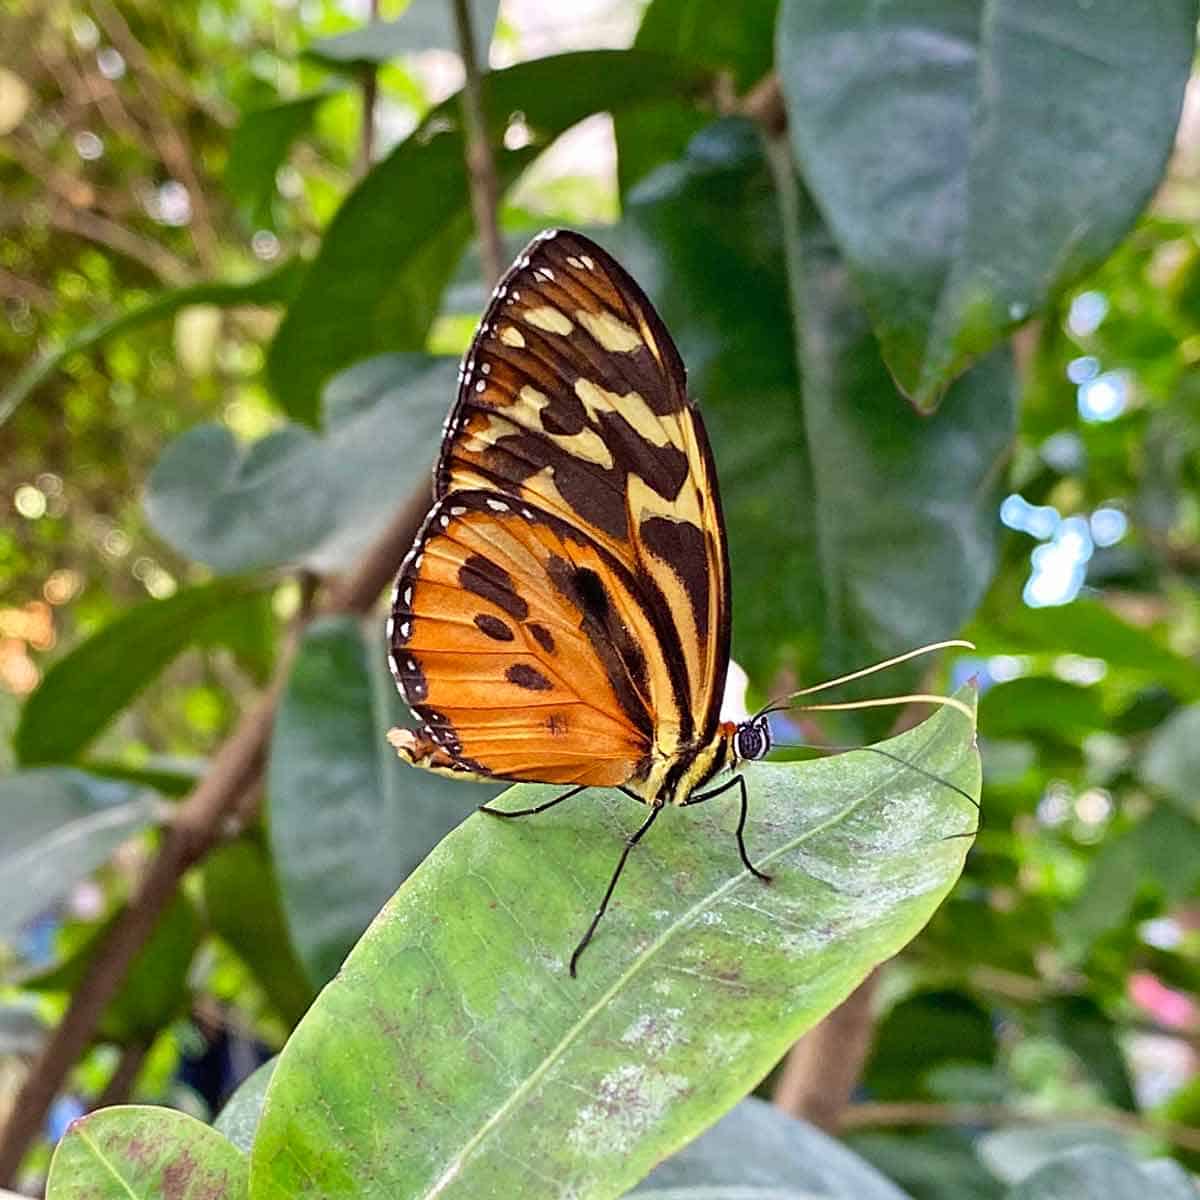 A butterfly on a green plant.